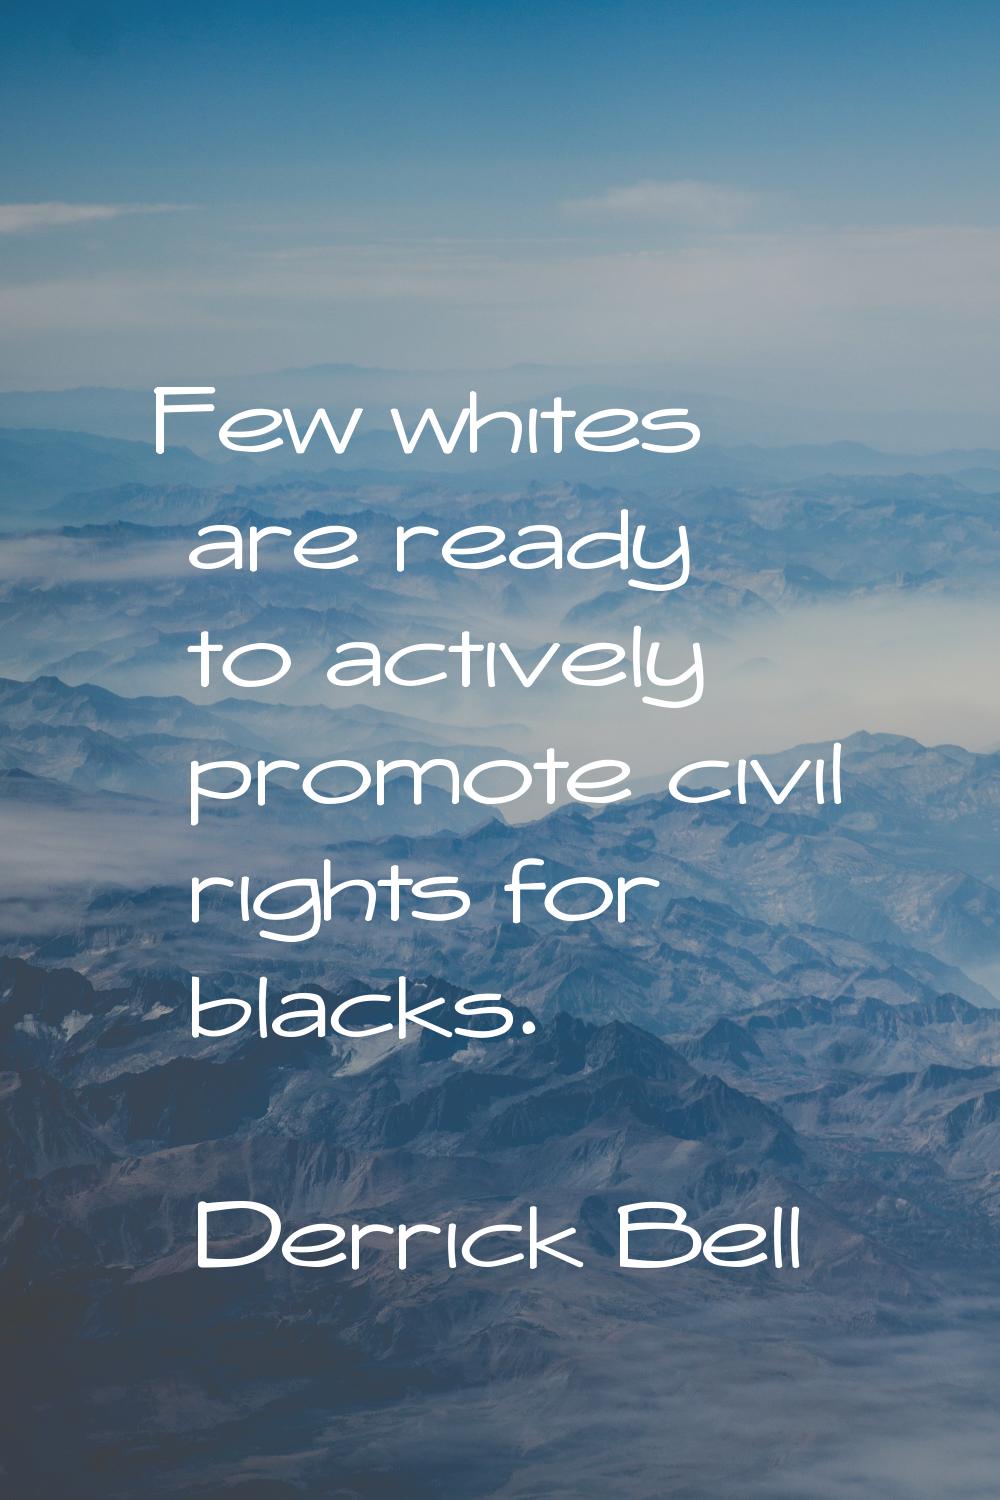 Few whites are ready to actively promote civil rights for blacks.